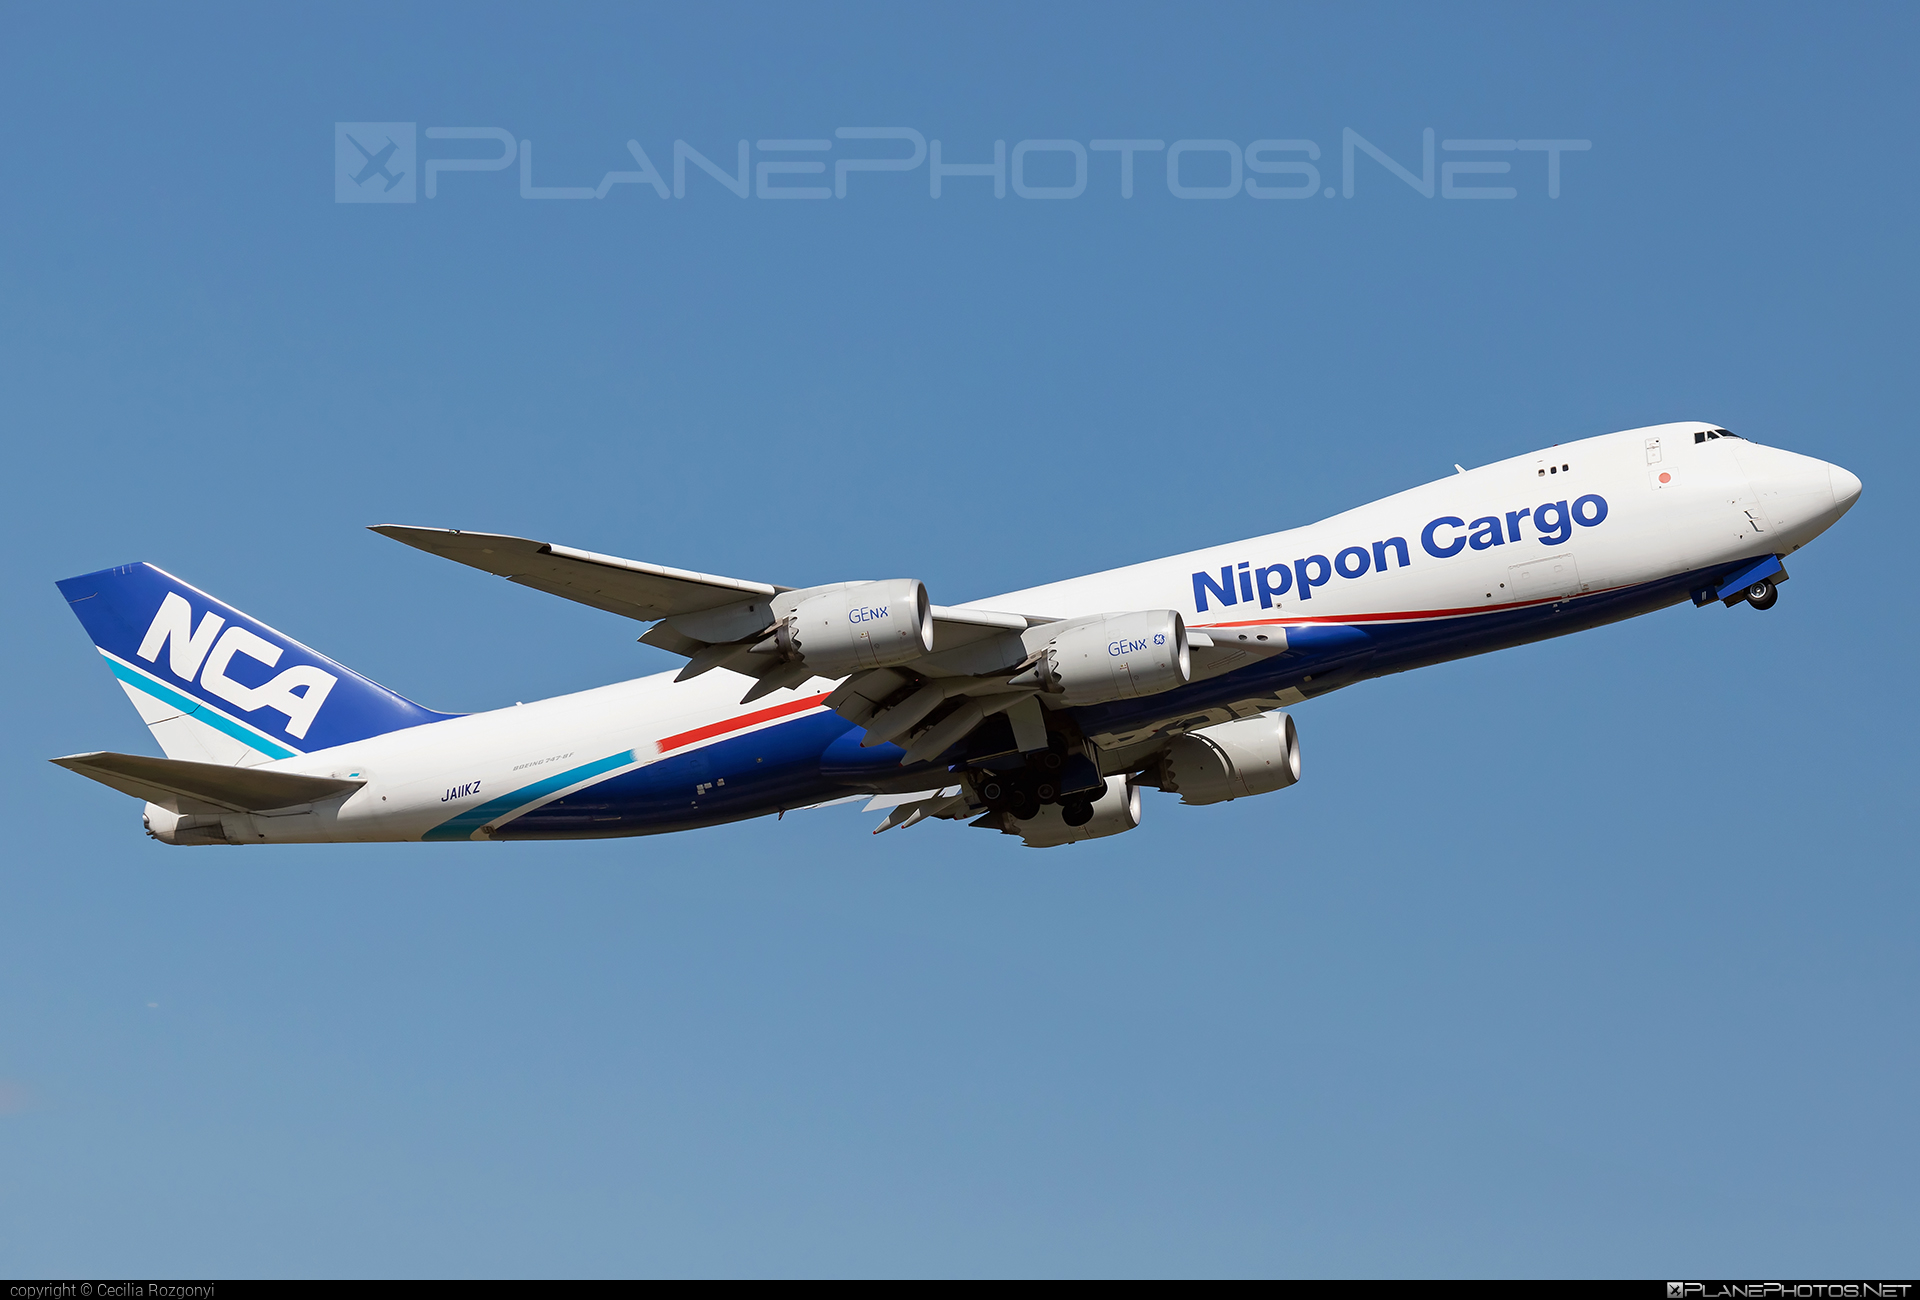 Boeing 747-8F - JA11KZ operated by Nippon Cargo Airlines (NCA) #b747 #b747f #b747freighter #boeing #boeing747 #jumbo